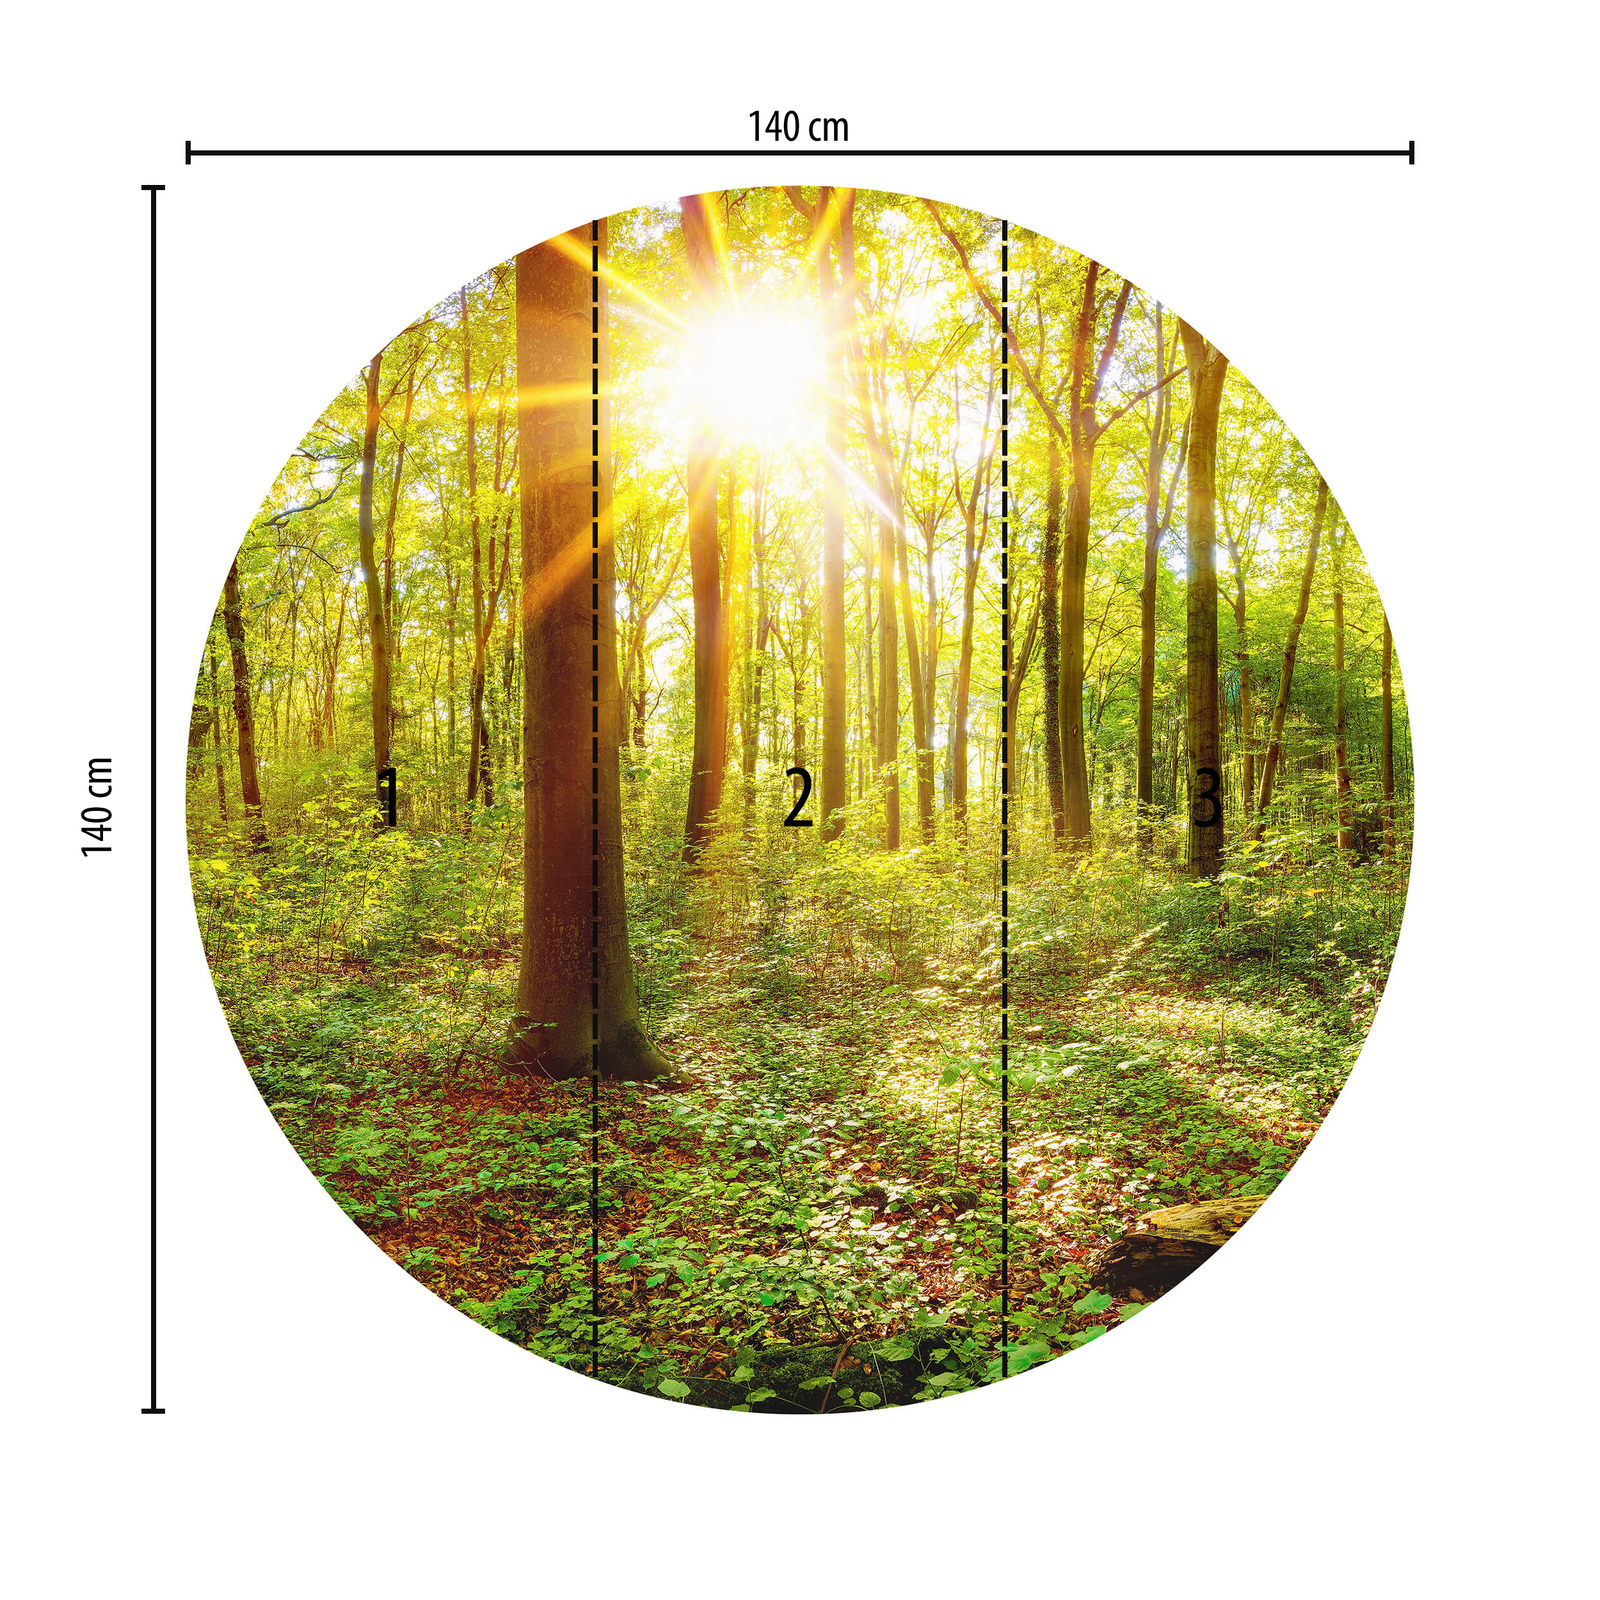             Photo wallpaper round sunny forest - green, brown
        